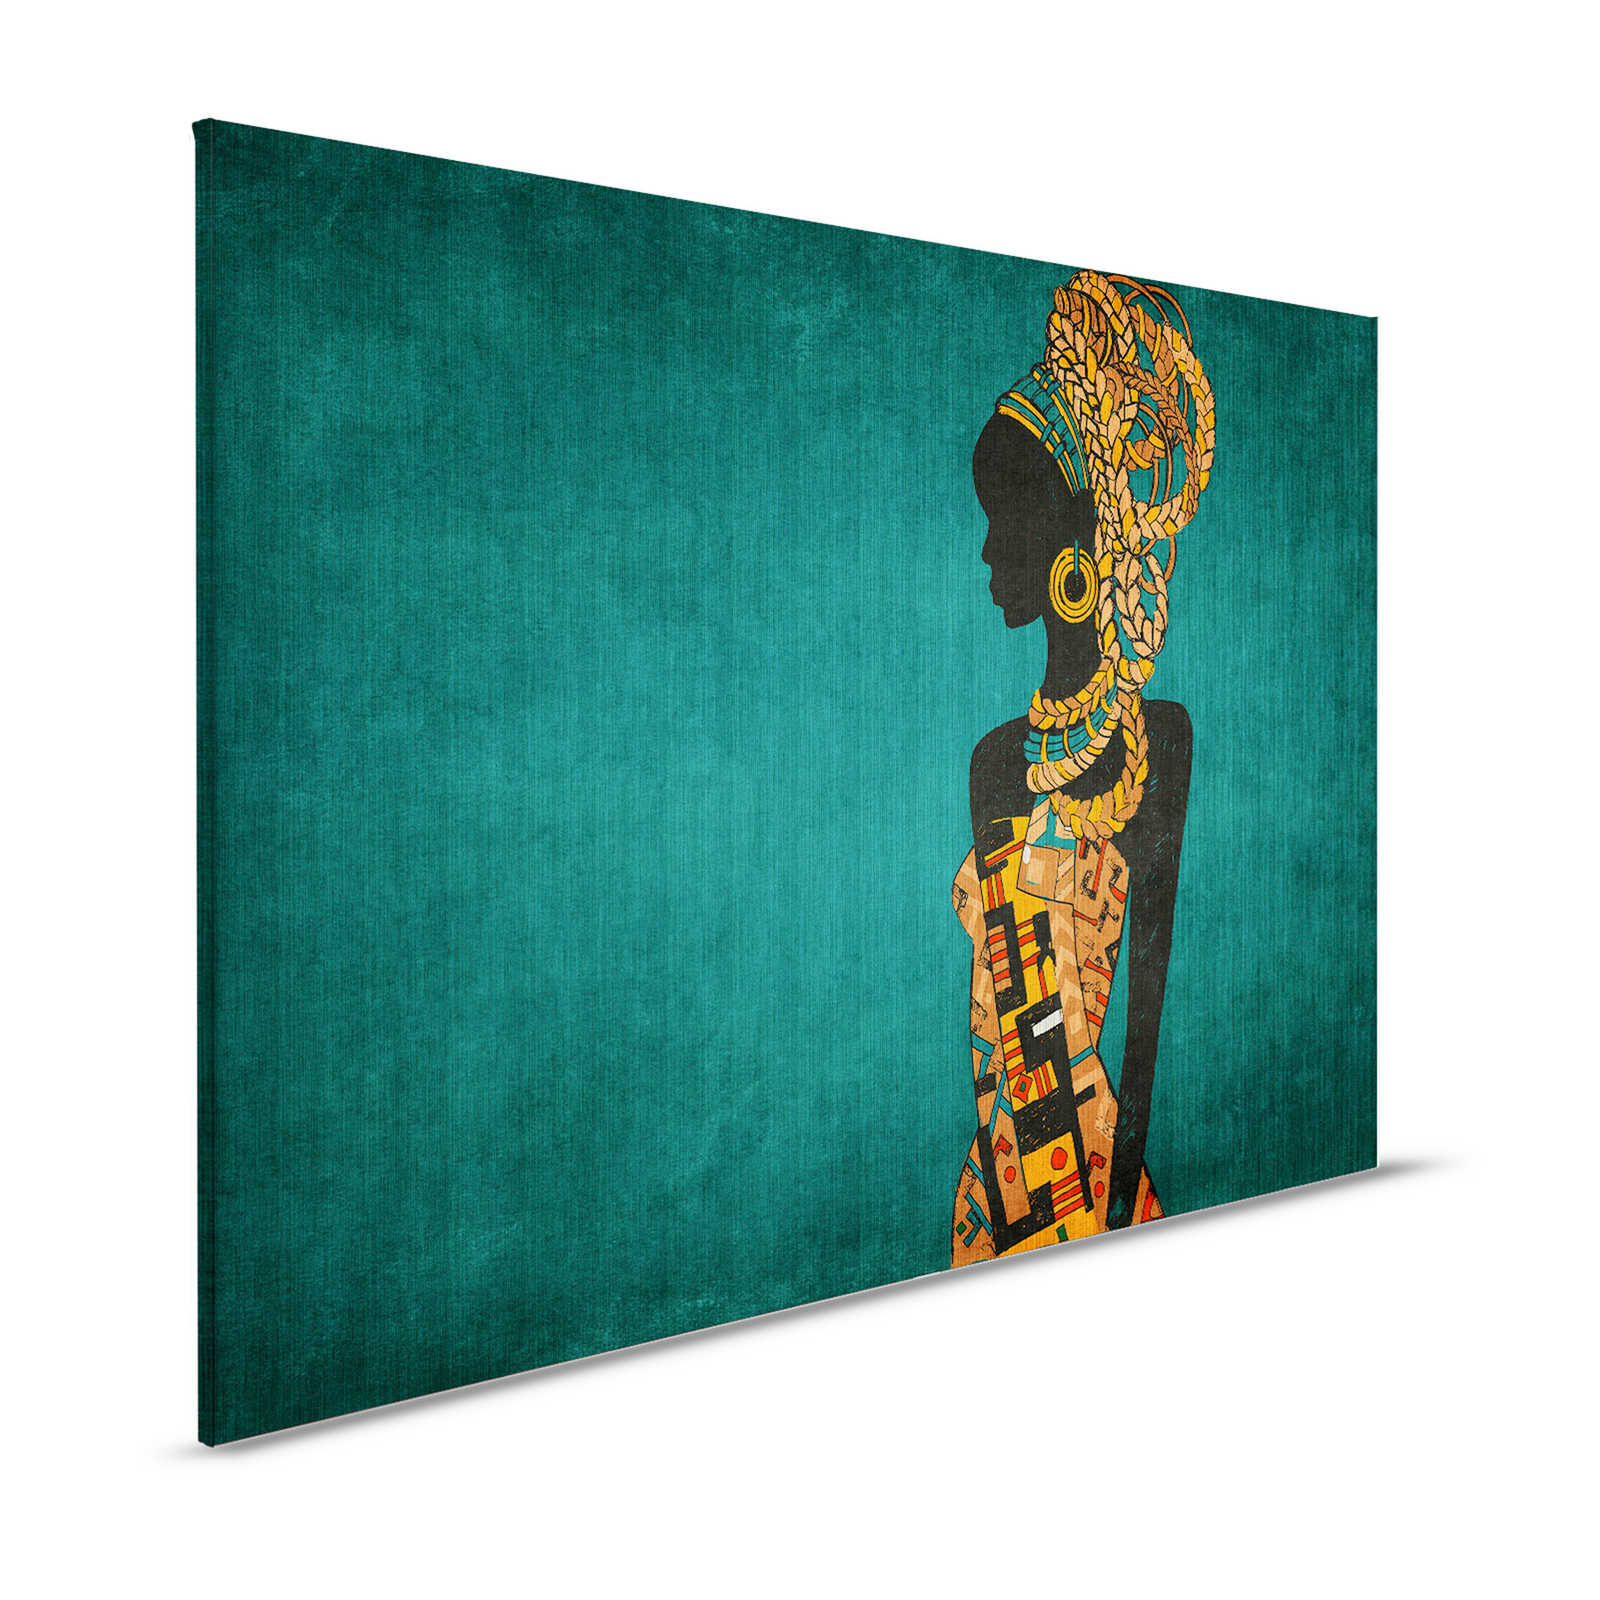 Nairobi 2 - African Style Canvas Painting Petrol with Women Sillouette - 1.20 m x 0.80 m
